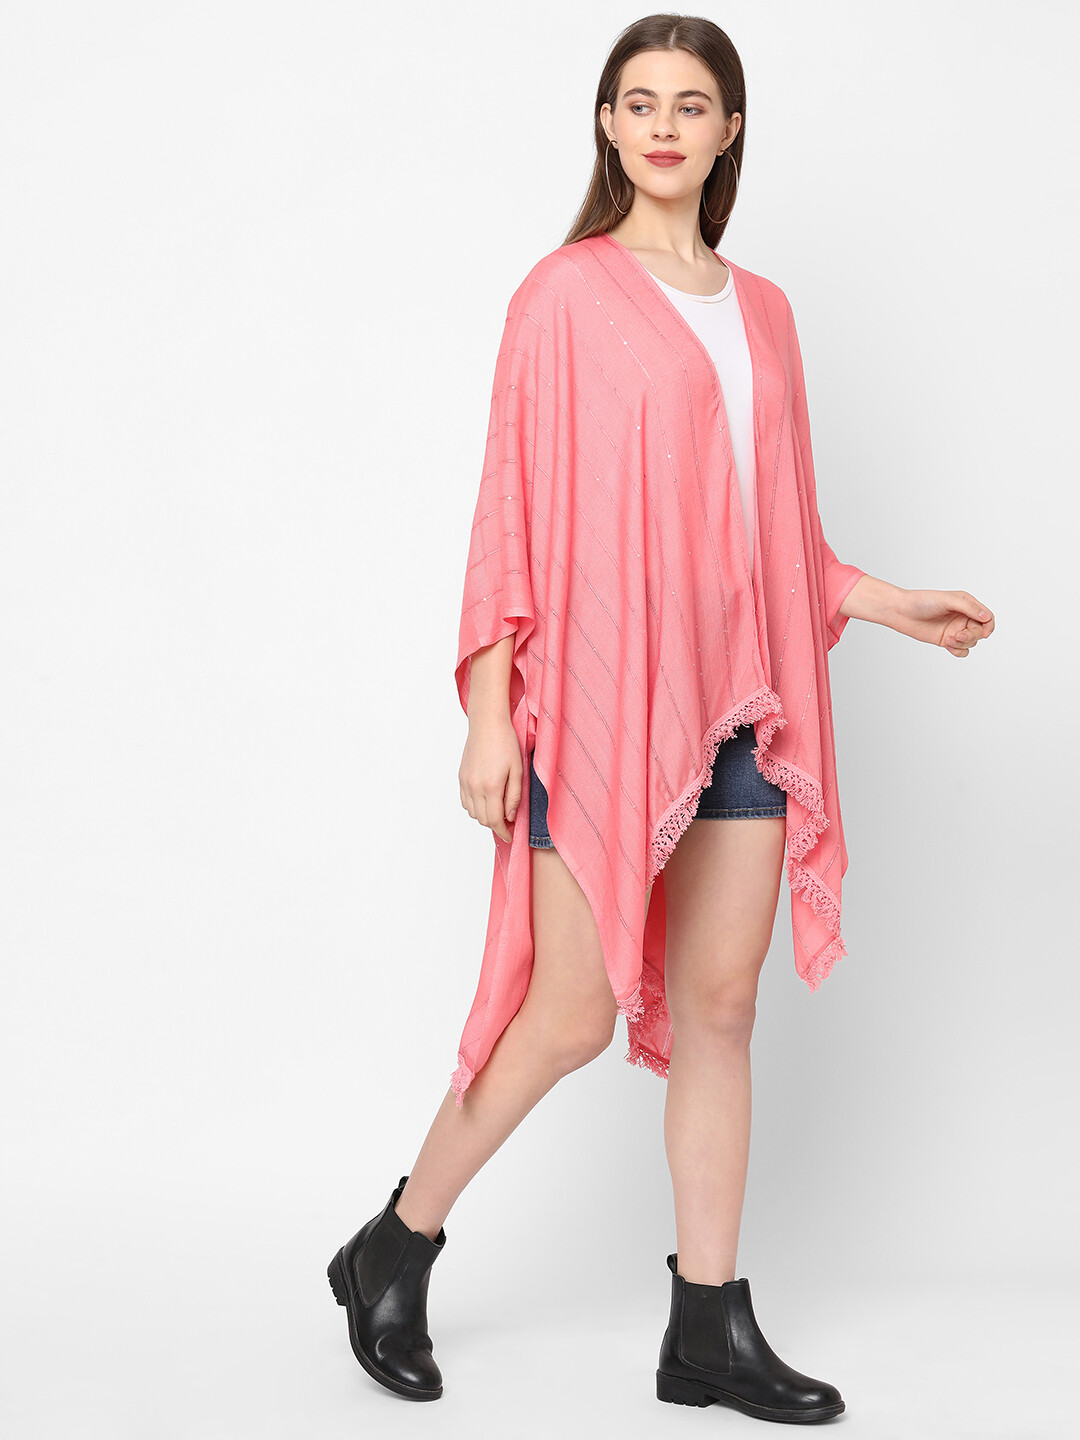 Sequins Fabric Pink Kimono with Lace